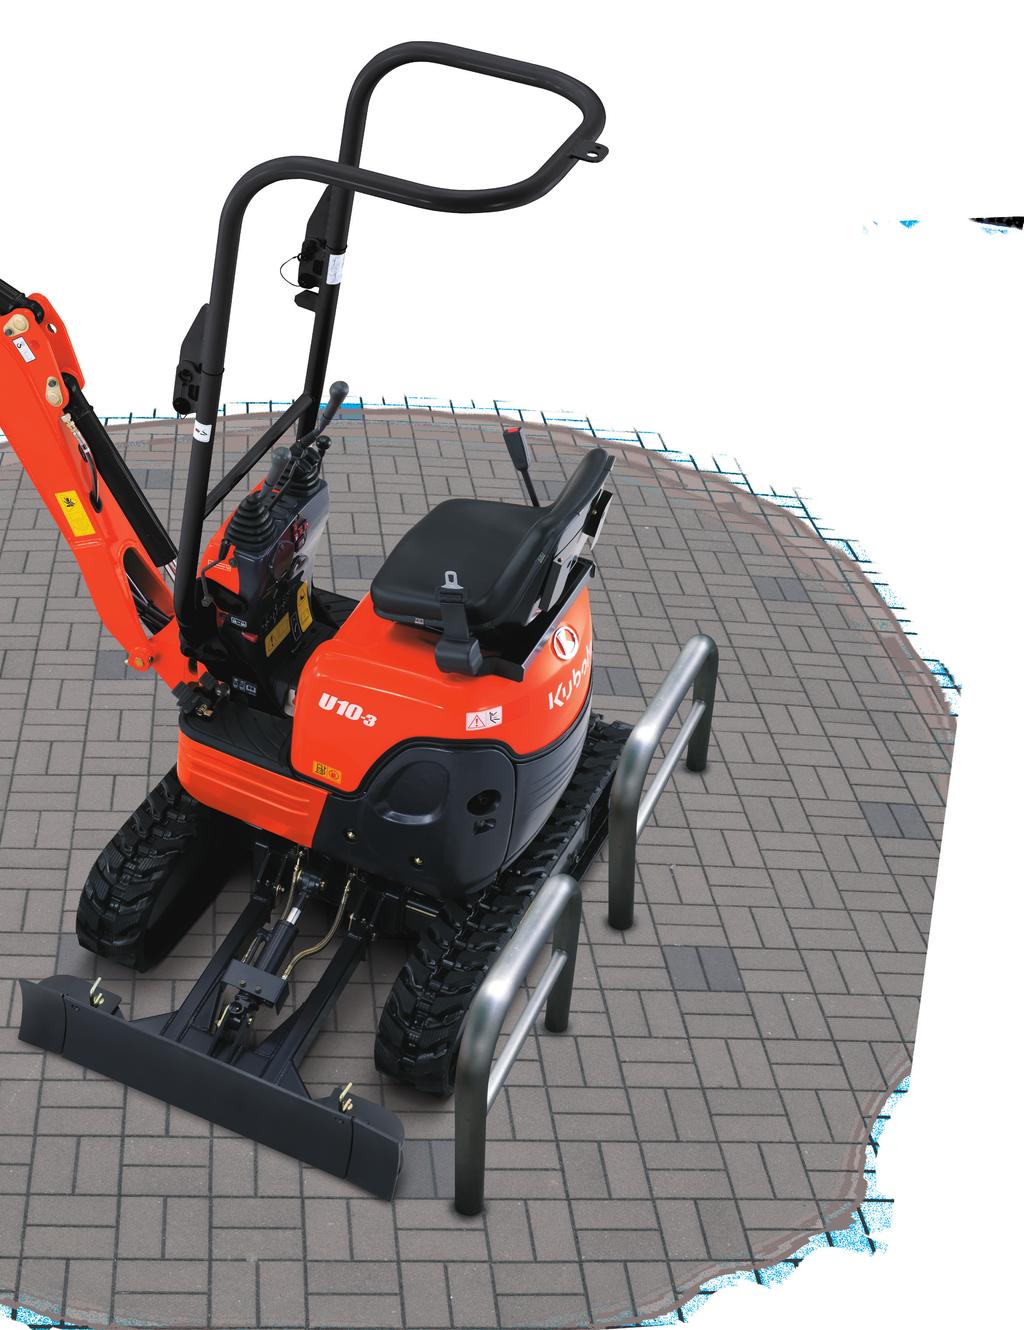 KUBOTA ZEROTAIL SWING MINIEXCAVATOR U103 Lifting points To permit access to confined spaces, as well as easy transport, the U103 has a threepoint lifting